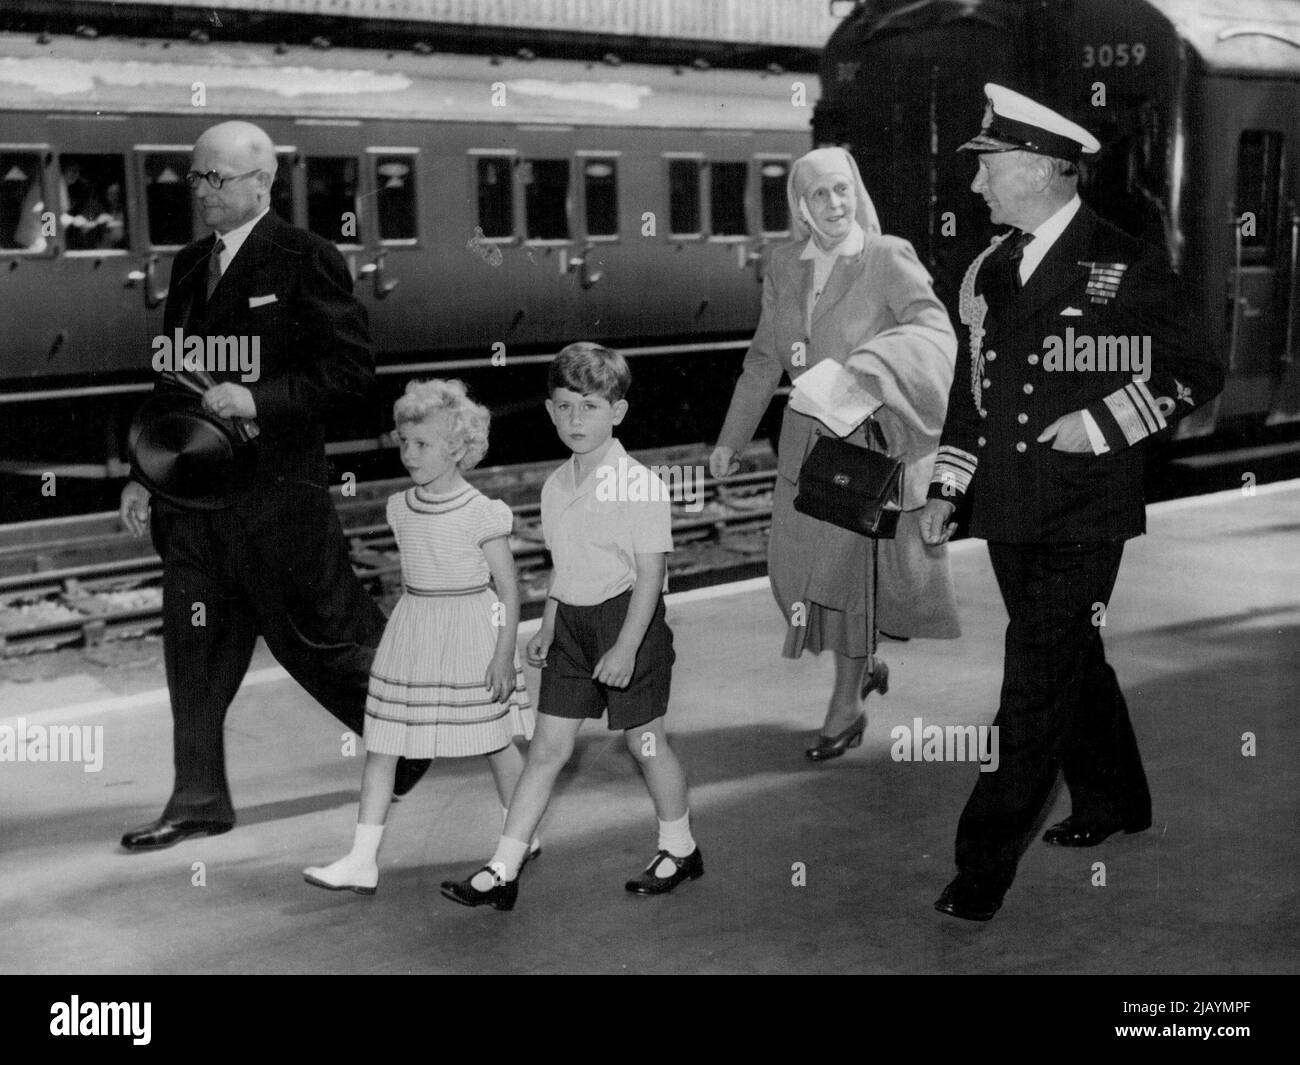 Royal Children Arrive At Portsmouth -- Prince Charles and his sister, Prince Anne, followed by their grandmother, Princess Andrew of Greece, and accompanied by Vice-Admiral Conolly Abel Smith, Flag officer Royal Yachts, and Stationmaster Mr. T. Fryer, walk from the train on arrival at Portsmouth to-day (Friday) from London to embark in the Royal yacht Britannia. They are to join their parents, the Queen and Duke of Edinburgh, on an eight-day cruise, during which the Royal couple will fulfill engagements in Wales, the Isle of Man, and Scotland. August 05, 1955. Stock Photo